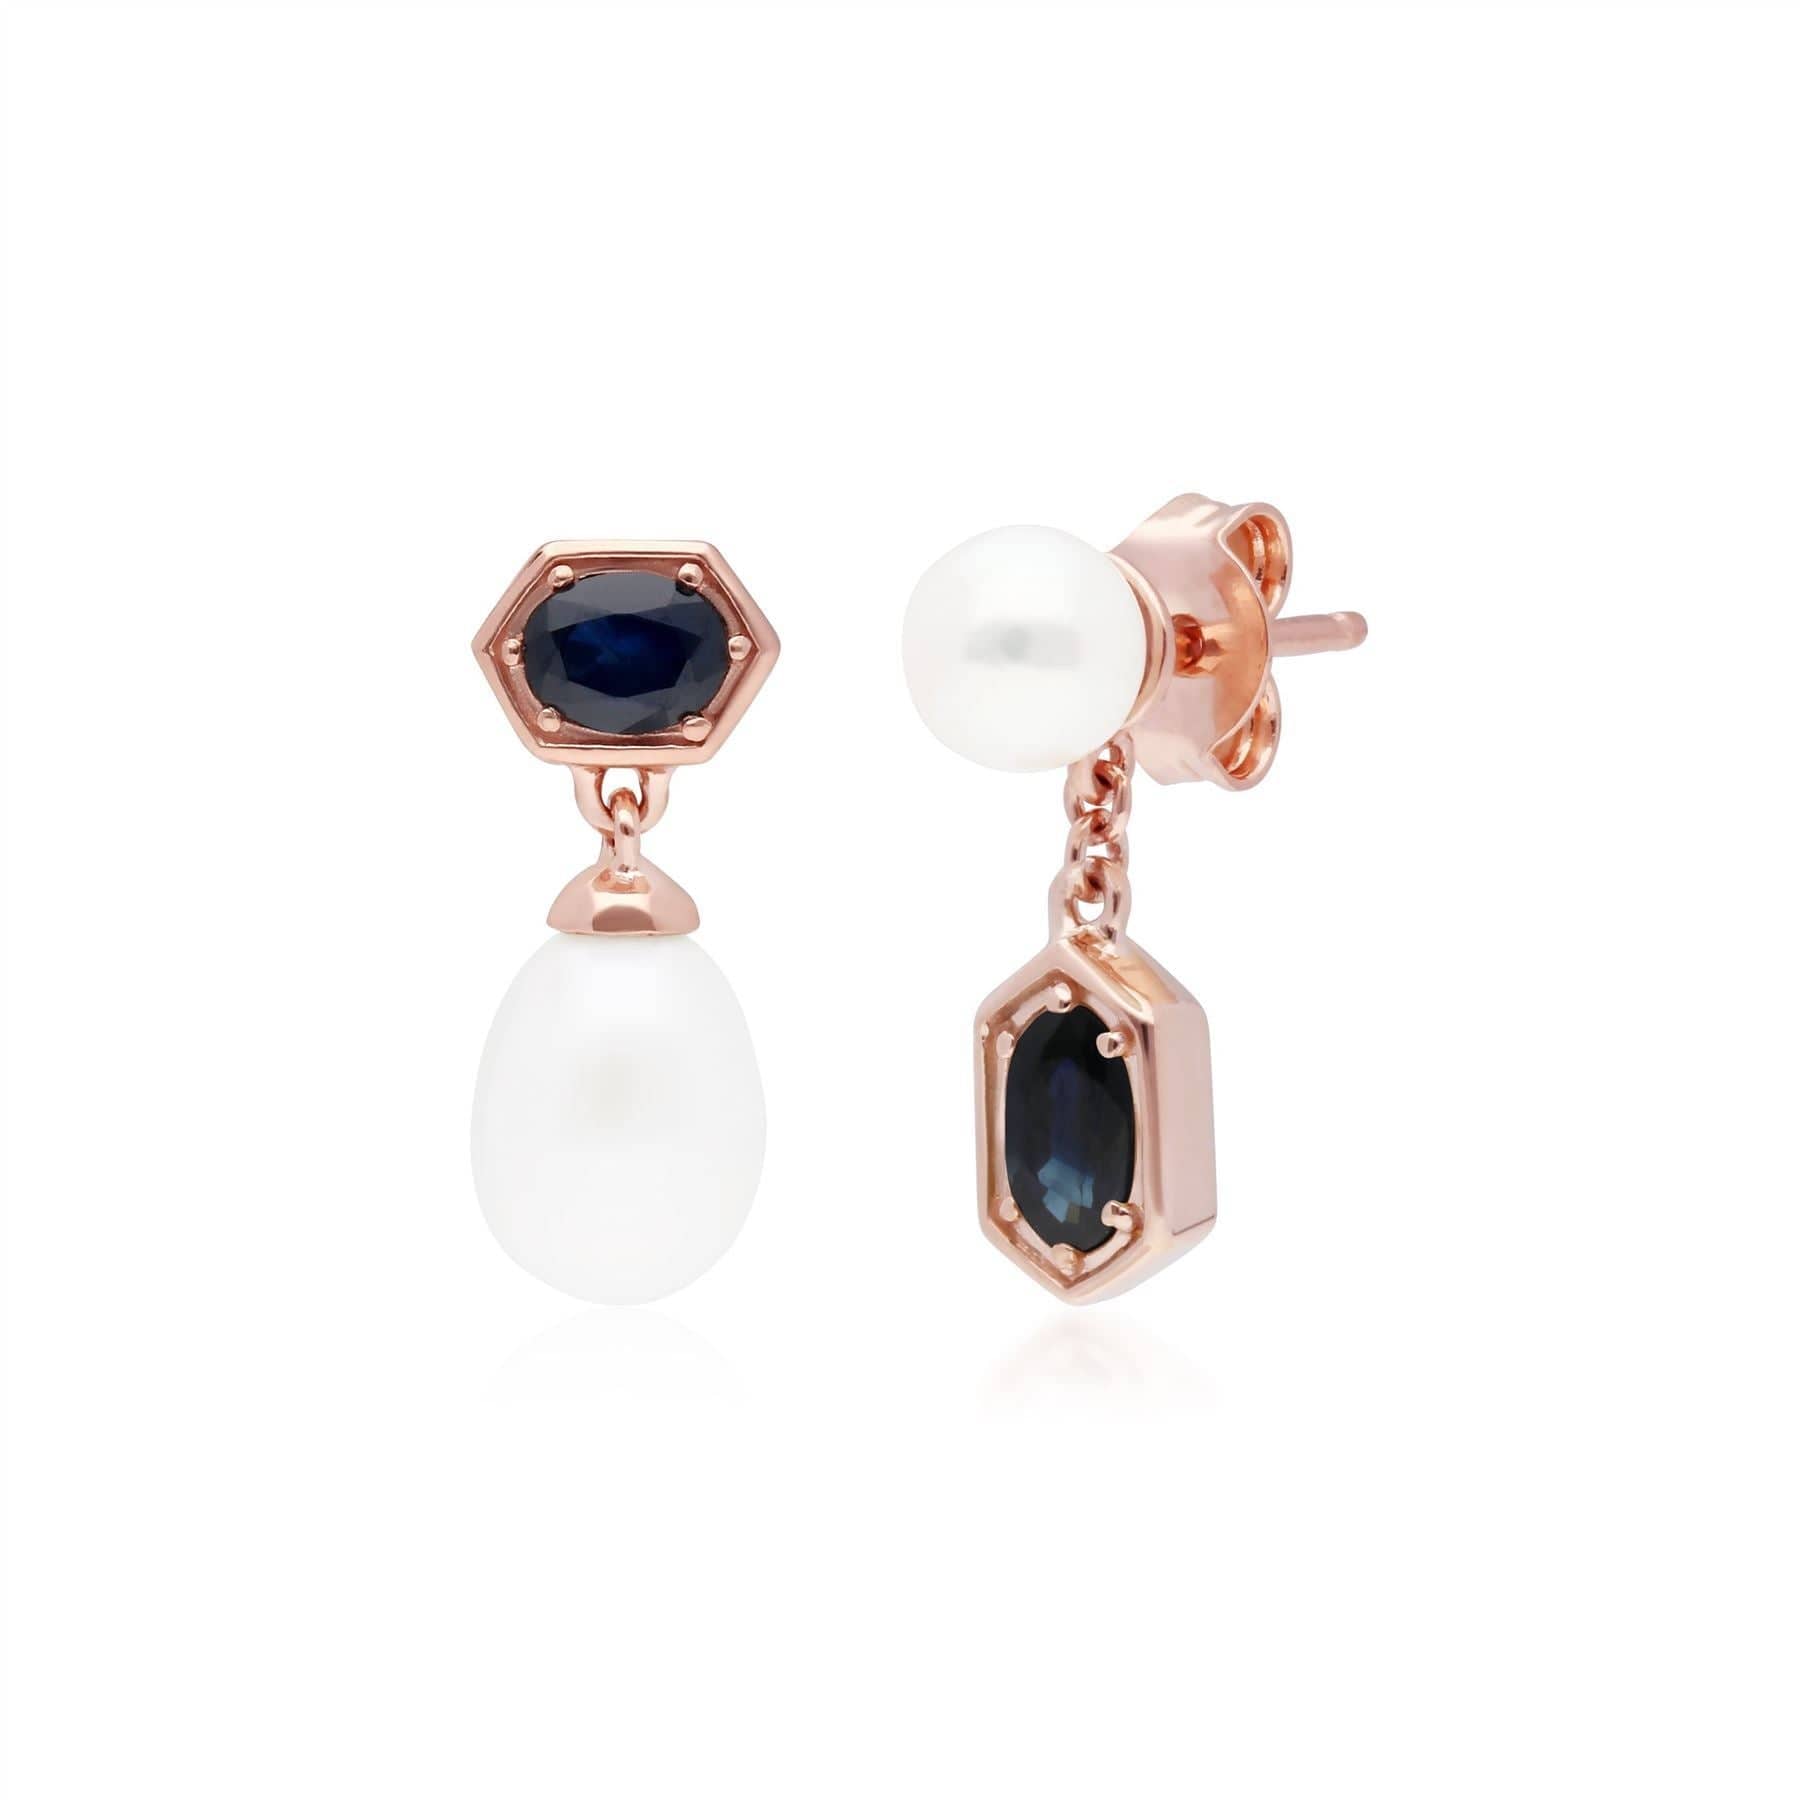 Modern Pearl & Sapphire Ring & Earring Set in Rose Gold Plated Silver - Gemondo